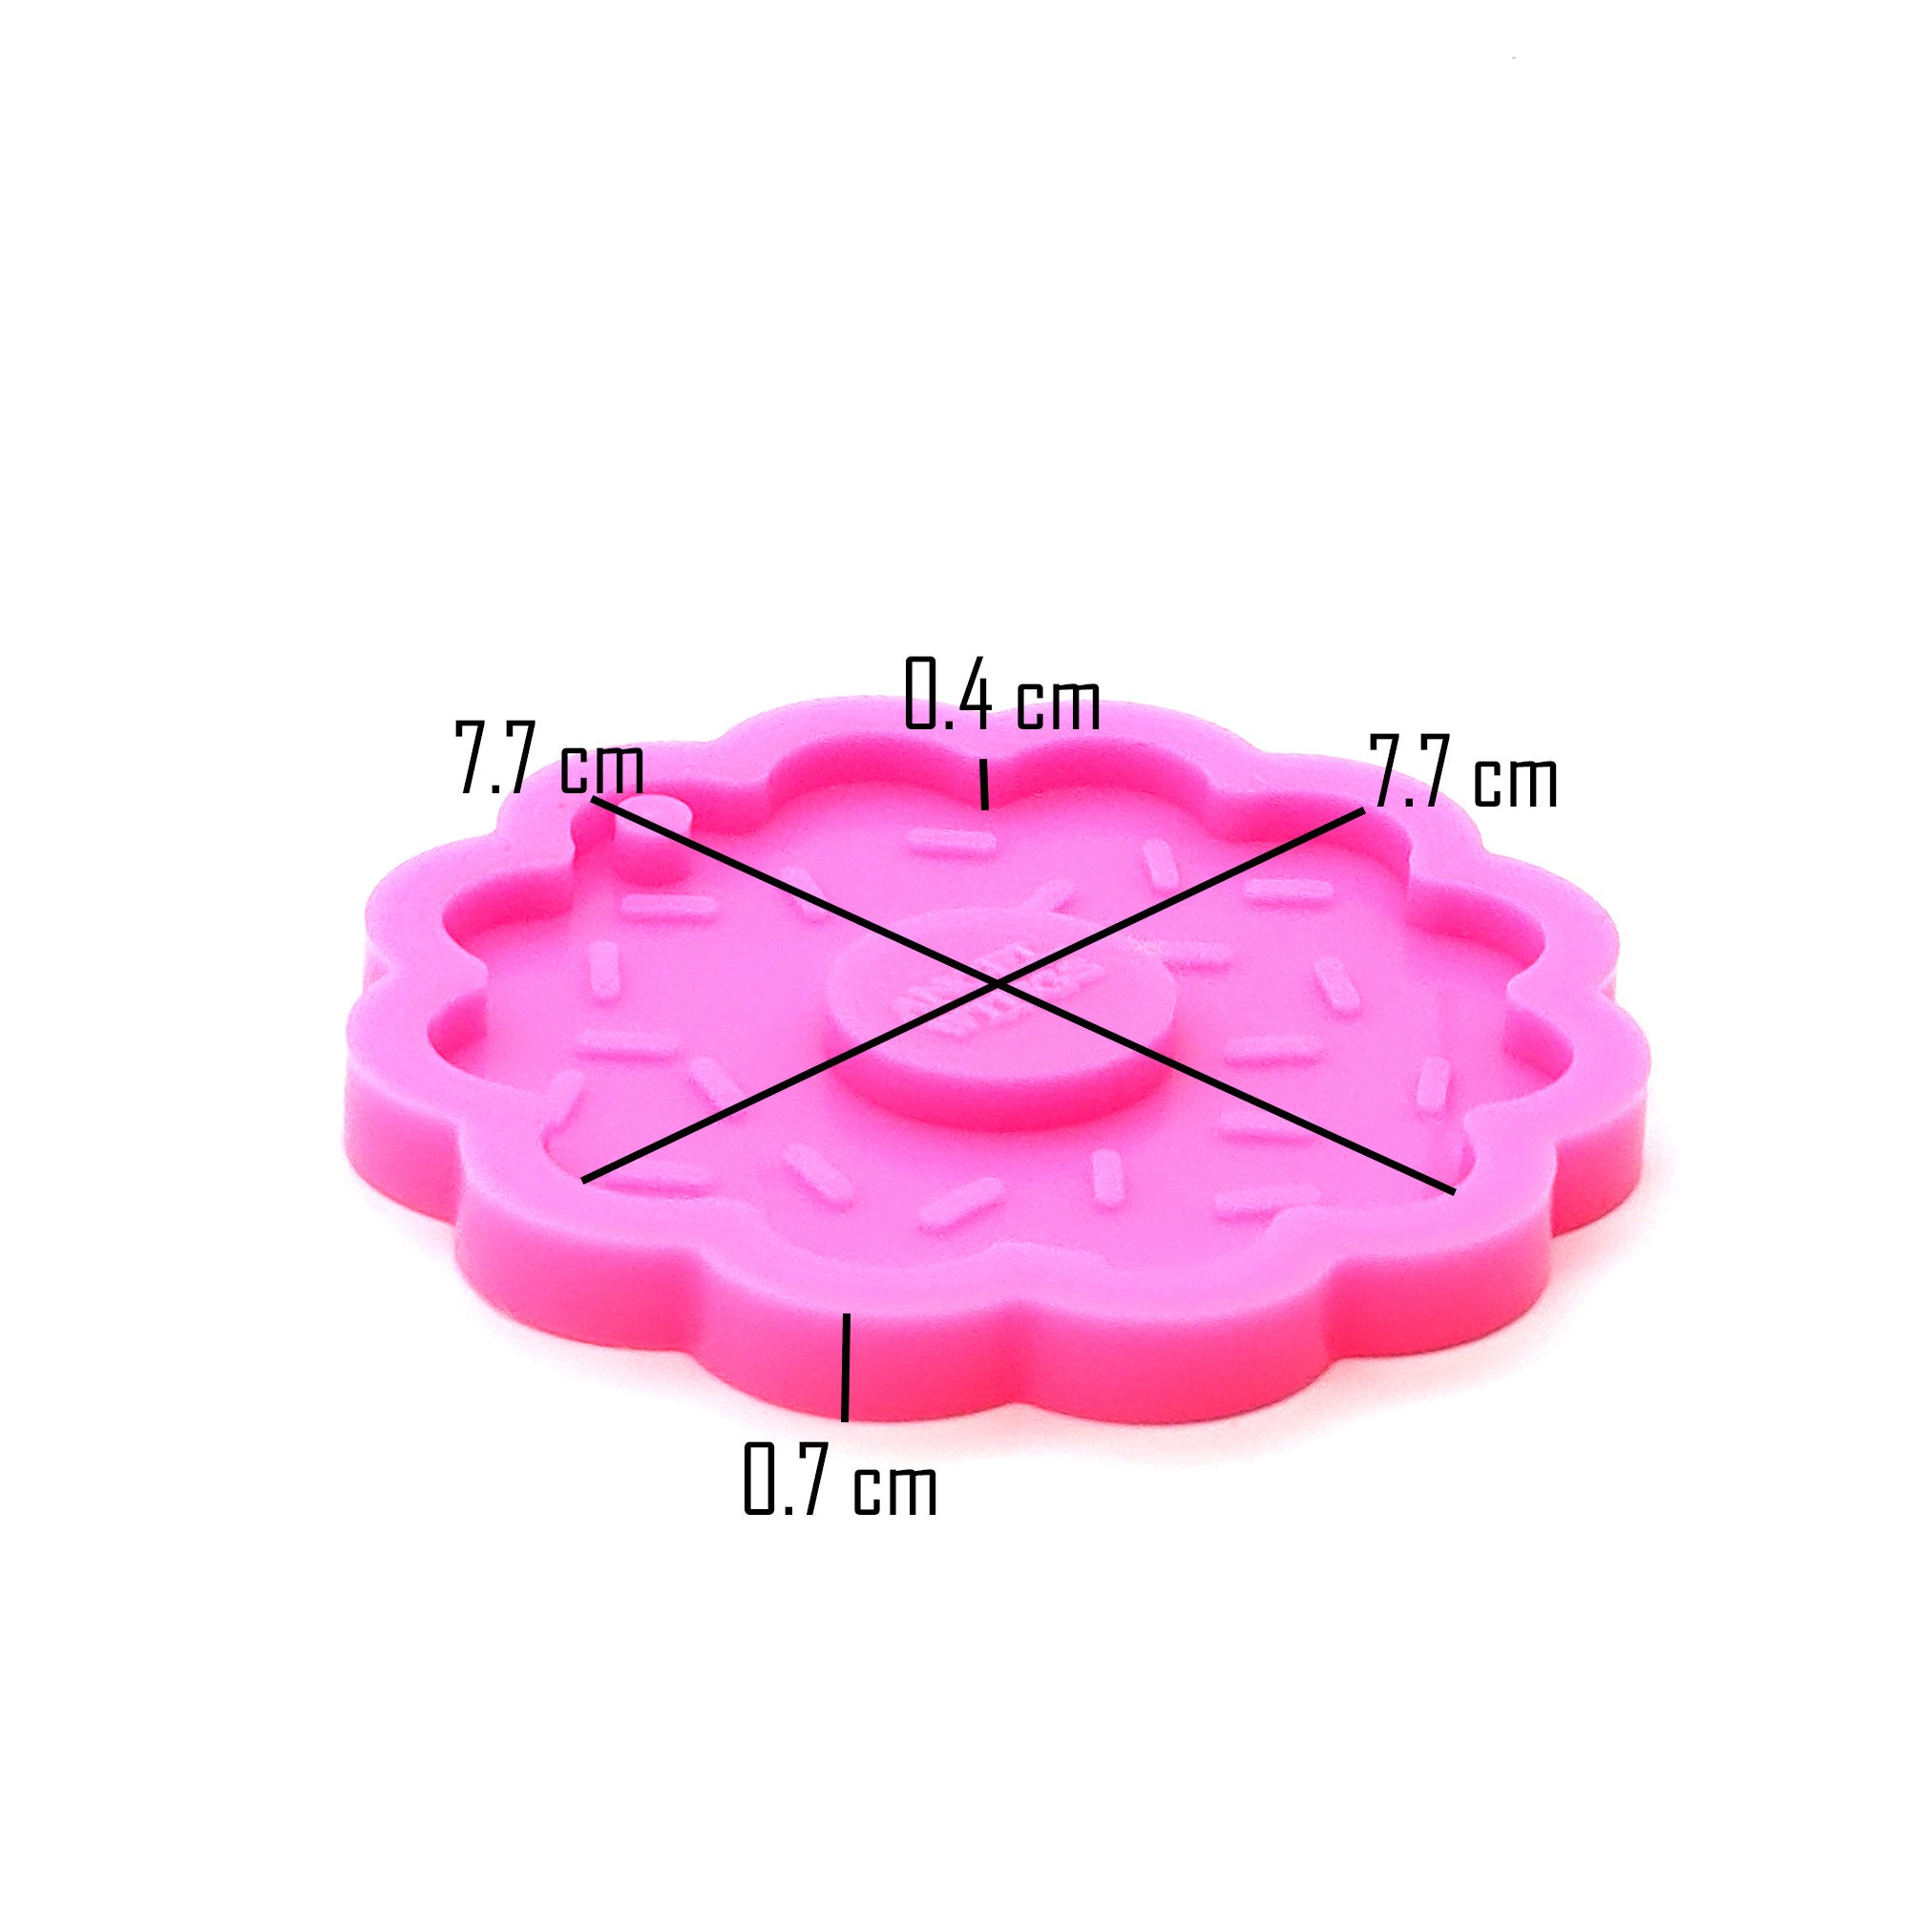 Donut Silicone Mold for Epoxy Resin Keychain - Jewelry Making - Ornament Silicone Mold